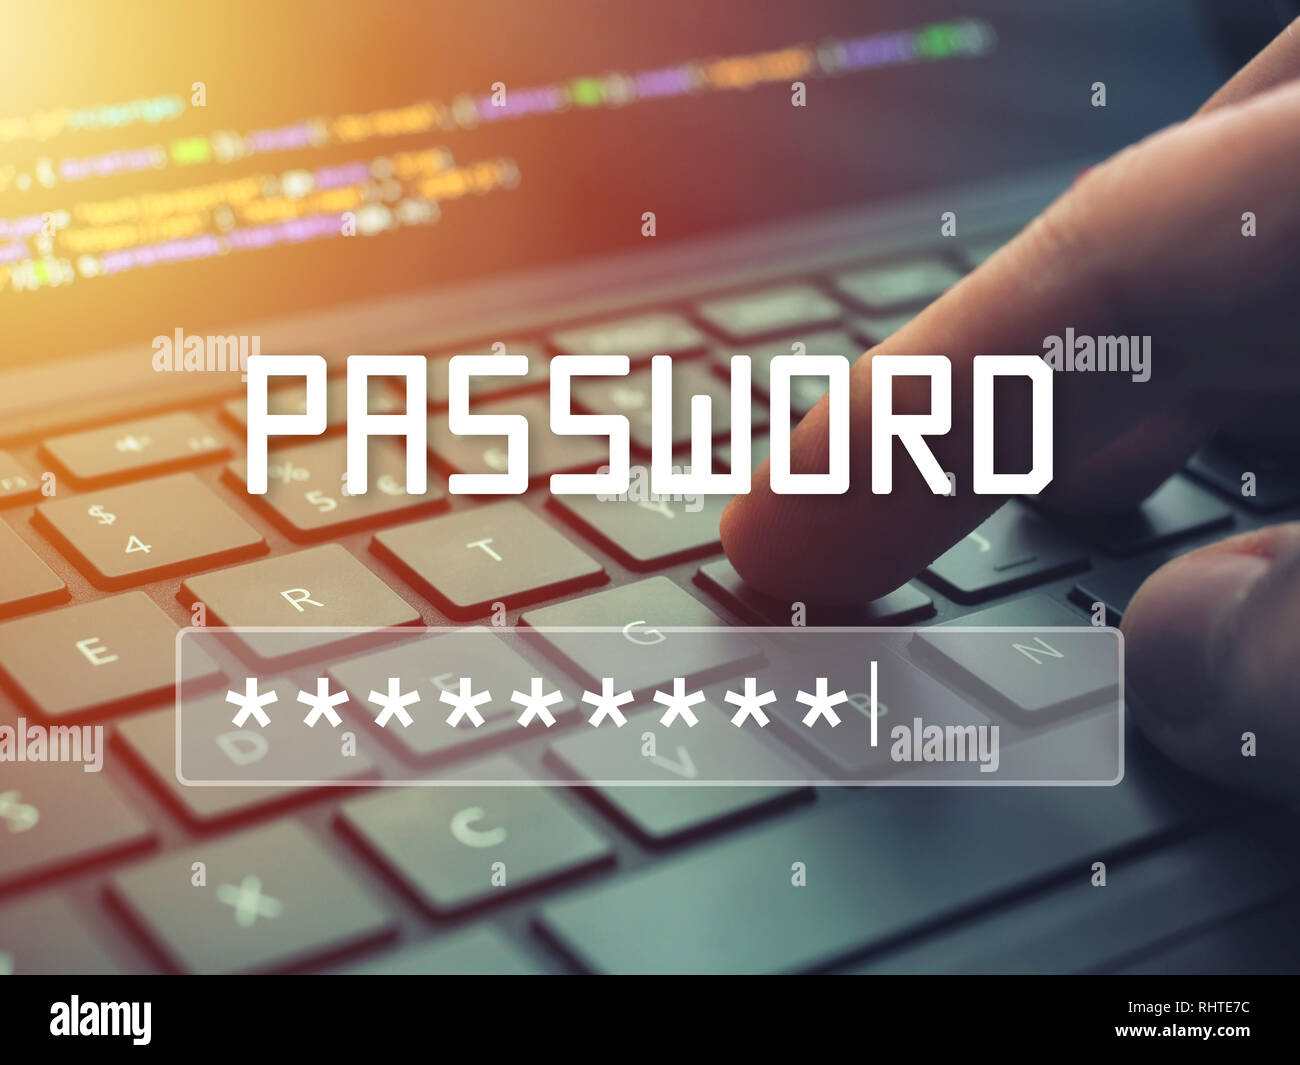 Password input on blurred background screen. Password protection against hackers. Stock Photo